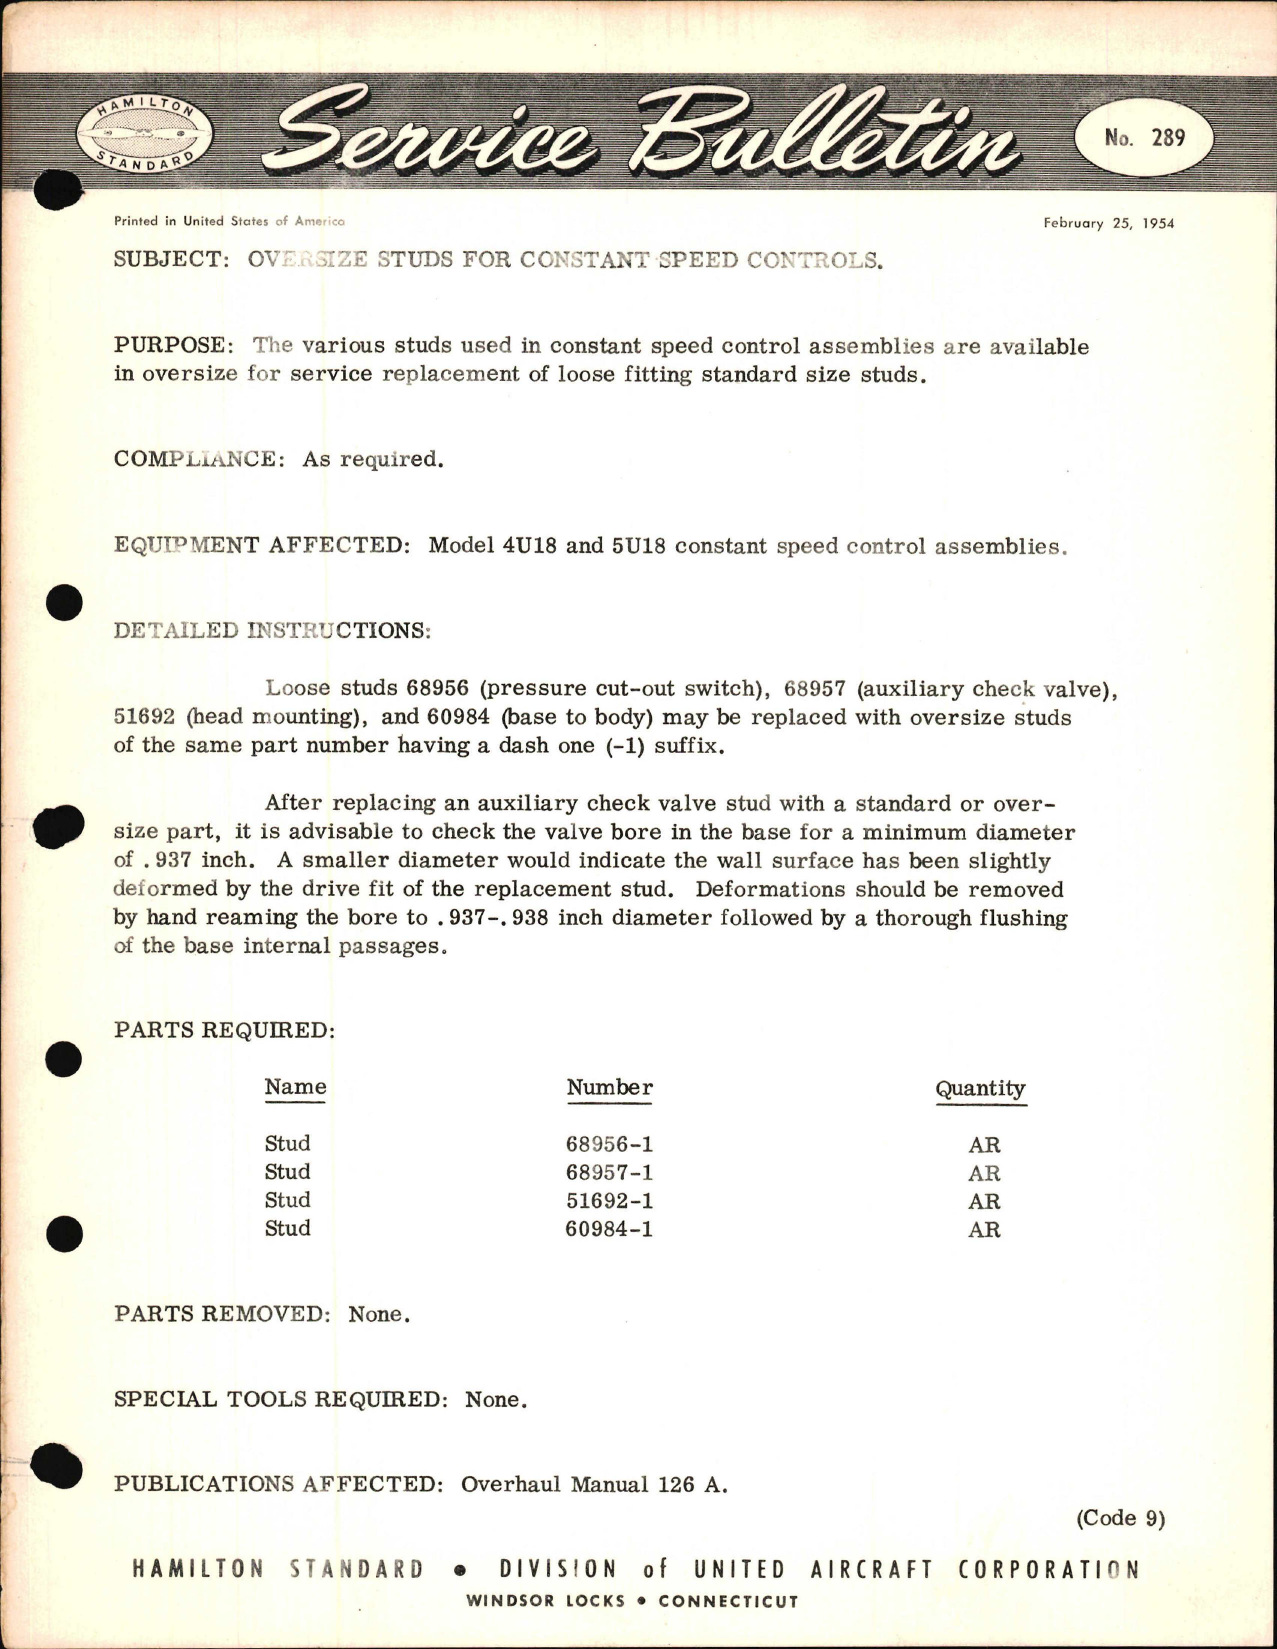 Sample page 1 from AirCorps Library document: Oversize Studs for Constant Speed Controls